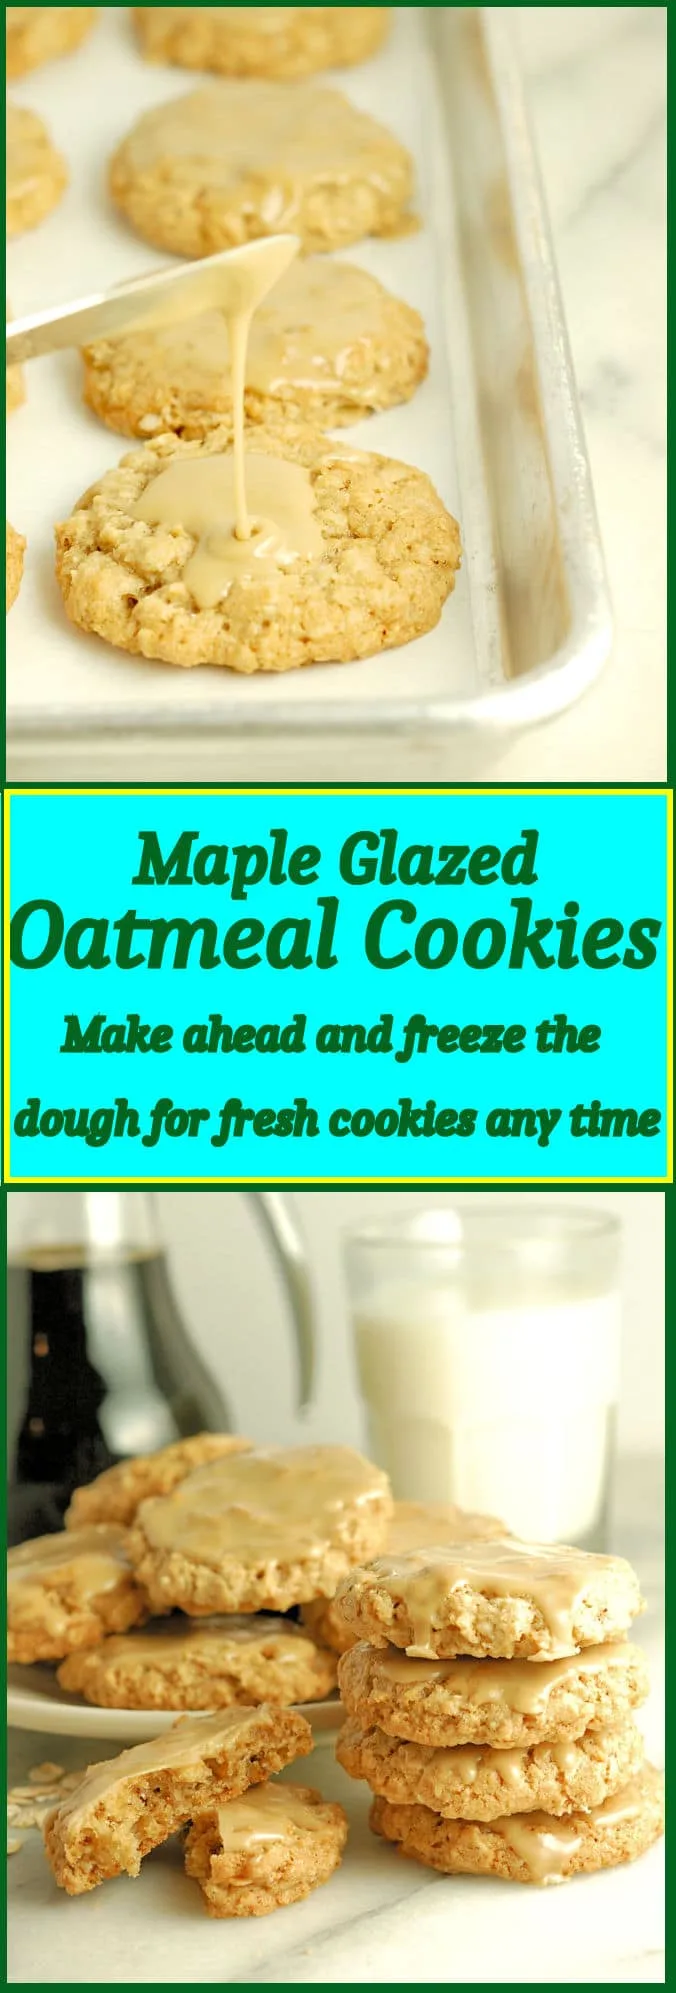 The best chewy oatmeal cookie you'll ever taste - with a thin coating of real Maple Glaze. Make the dough ahead and freeze for fresh cookies any time.